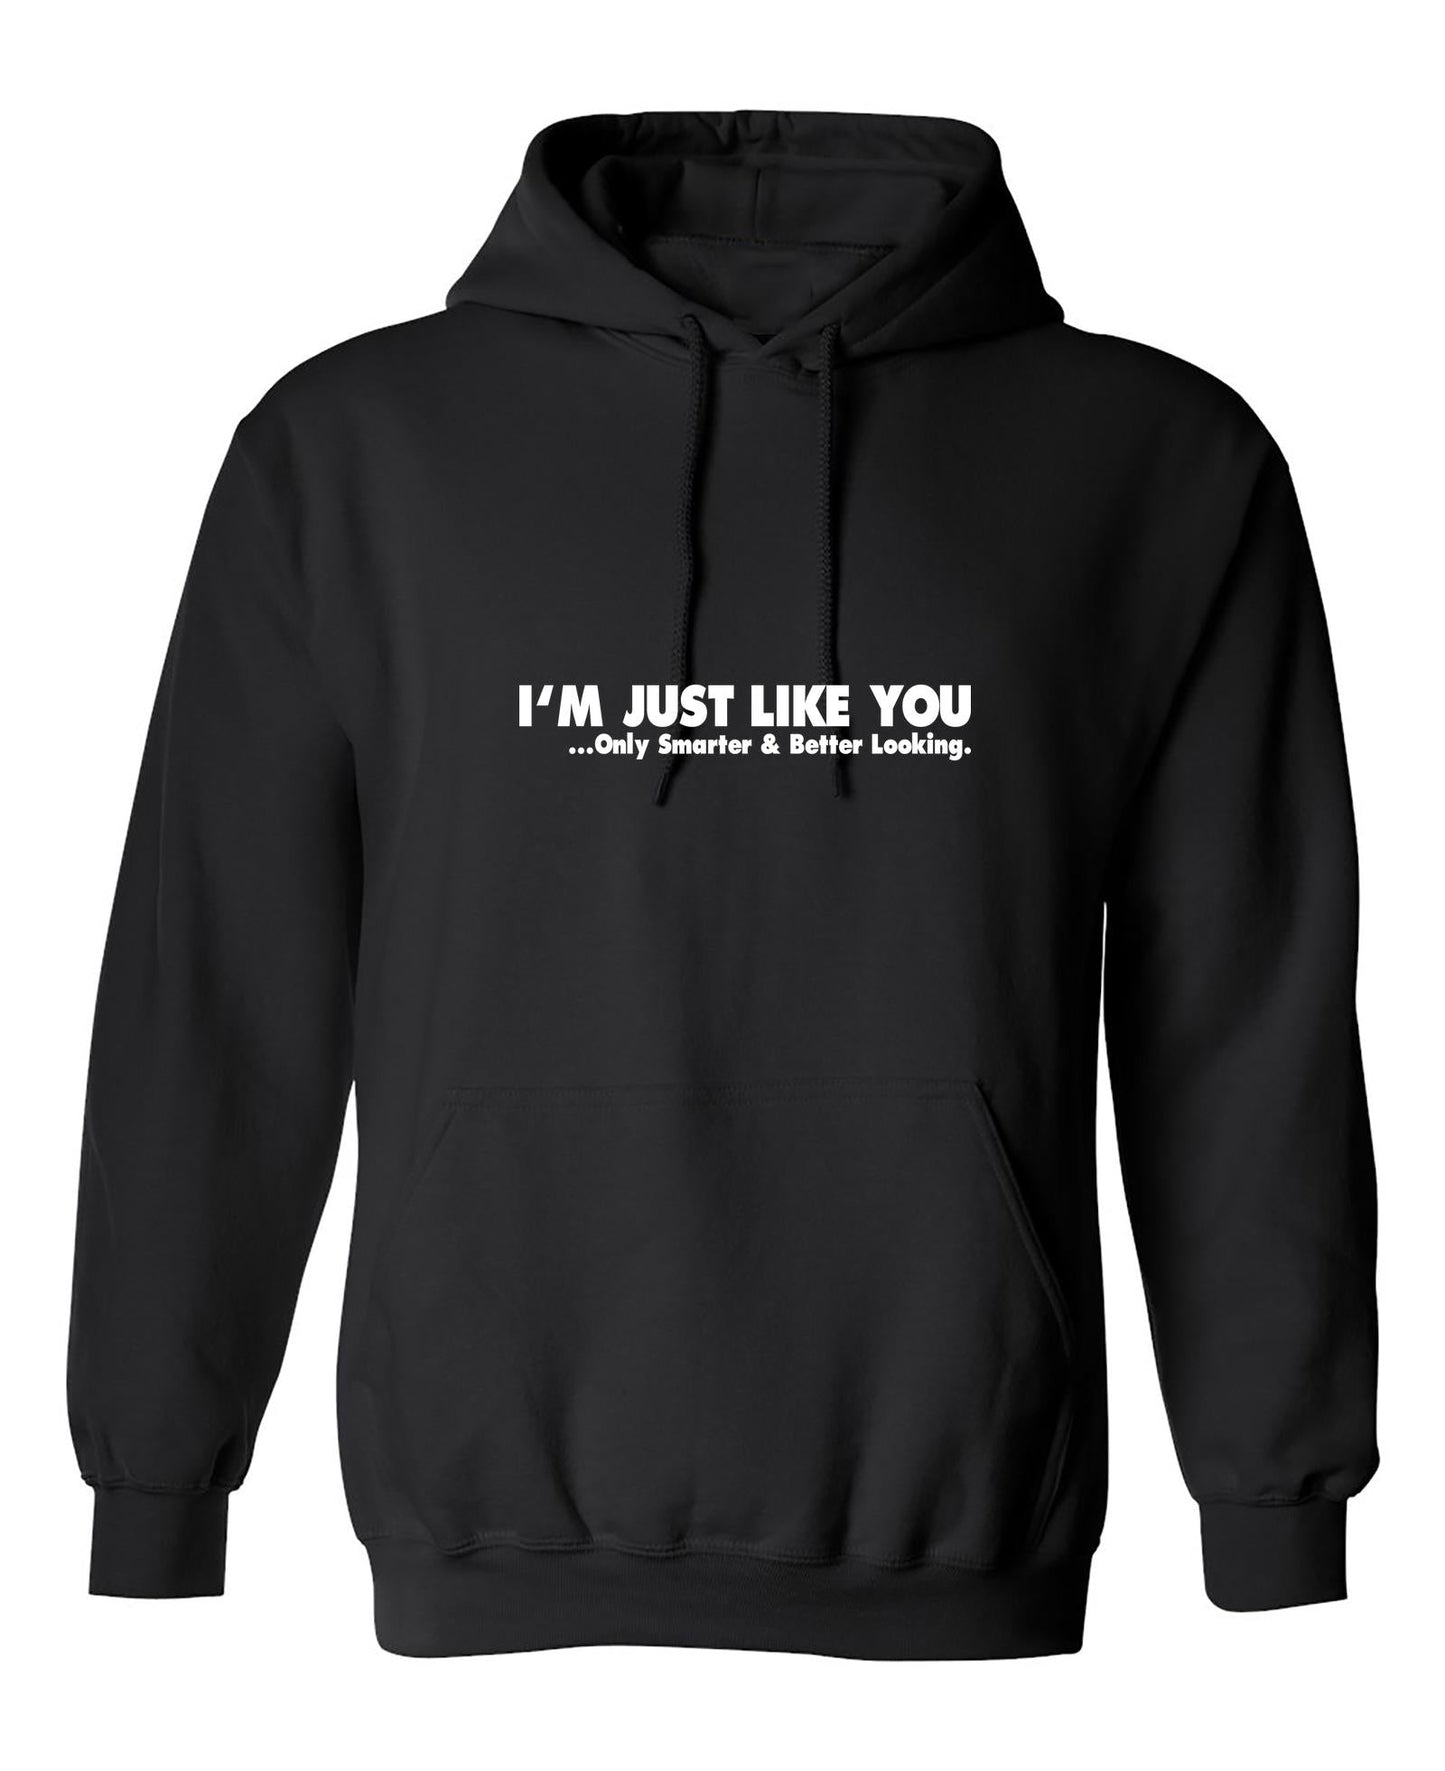 Funny T-Shirts design "I'm Just Like You Only Smarter And Better Looking"